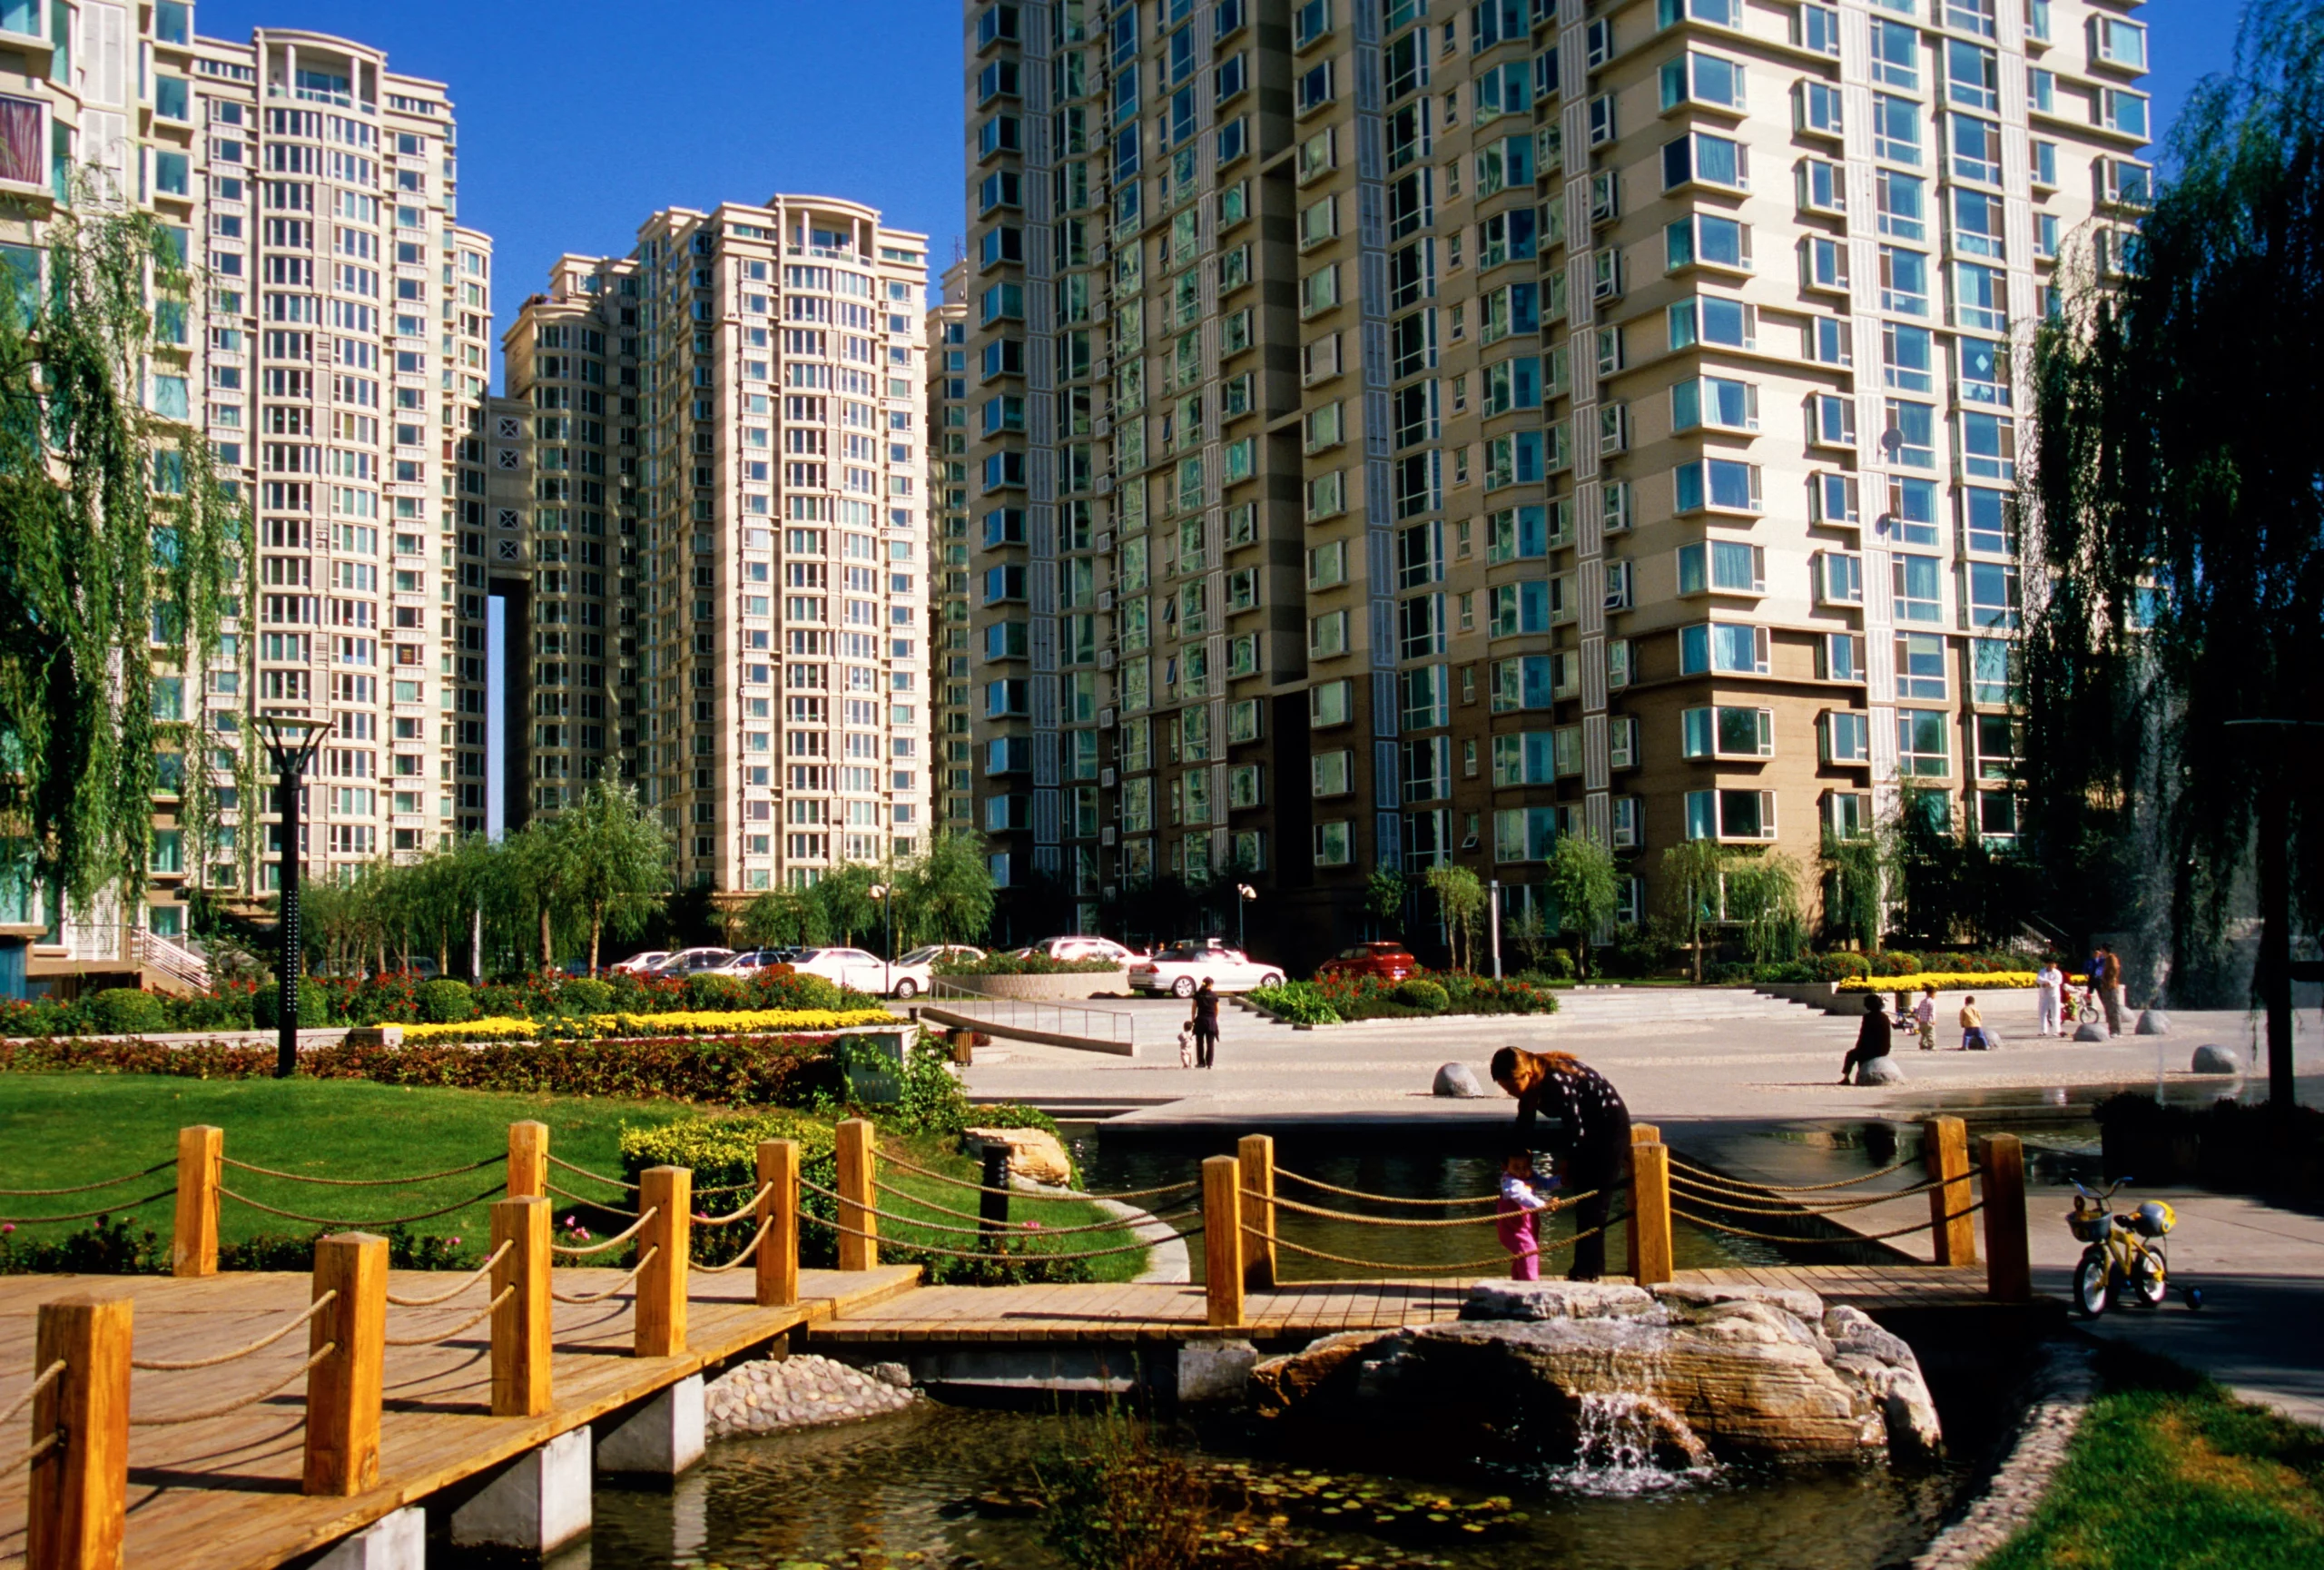 Chinese apartment complexes